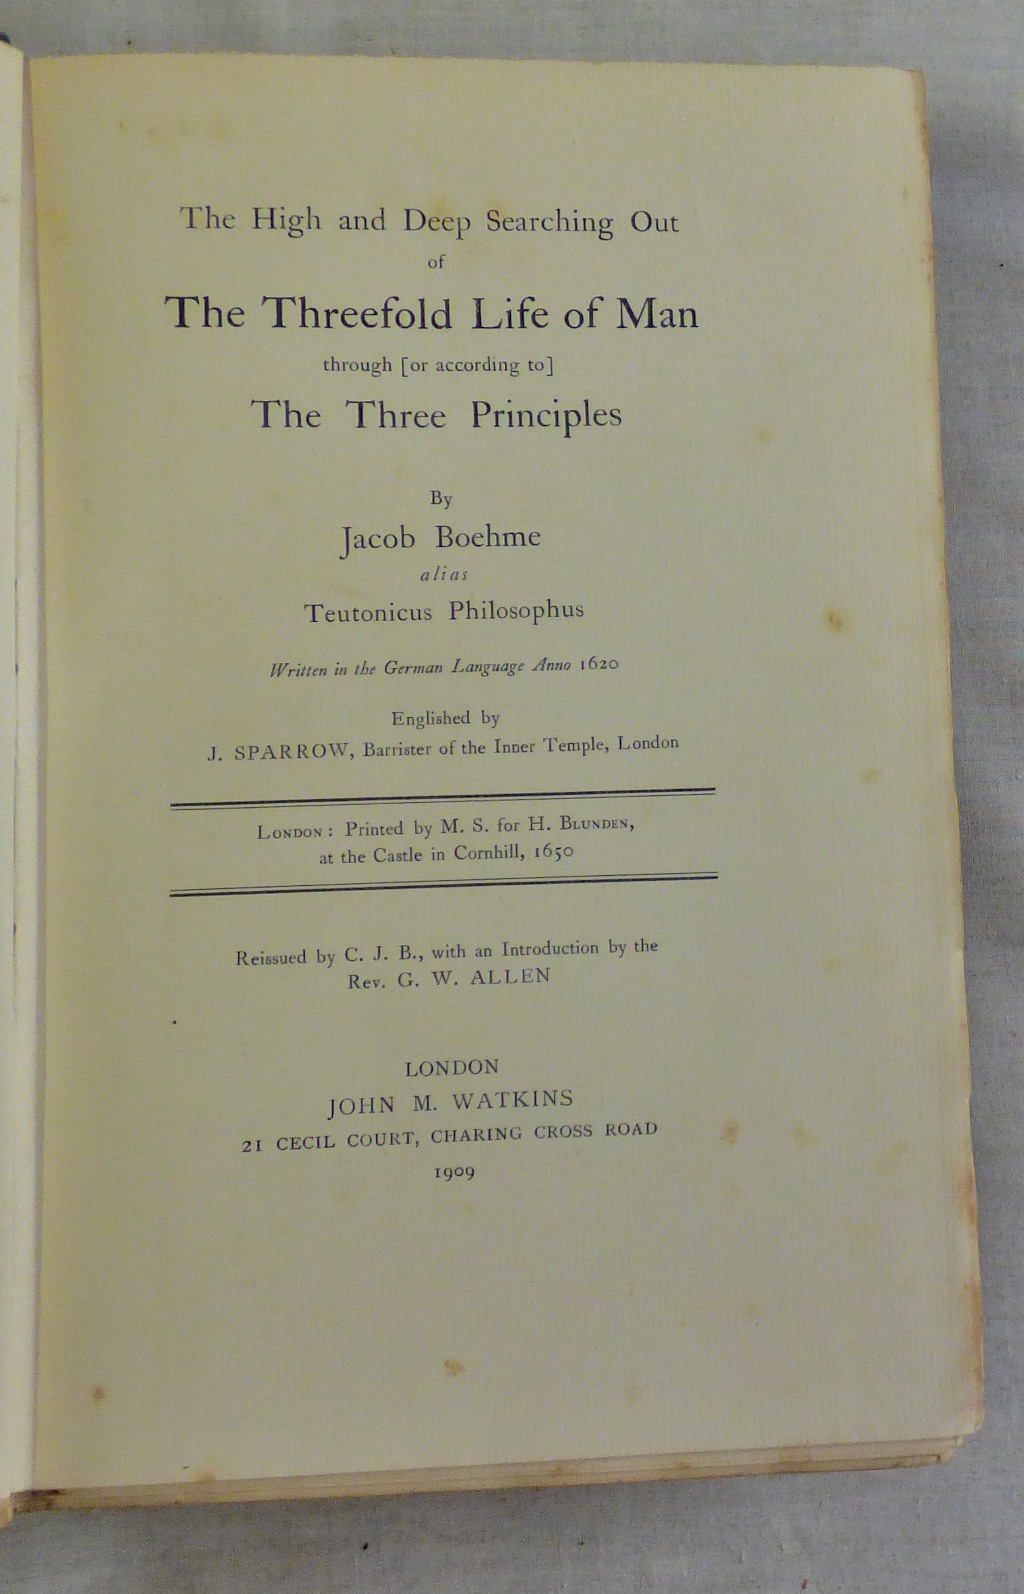 Boehm Jacob - The High and Deep Searching out of the Threefold Life of Man, written in the German